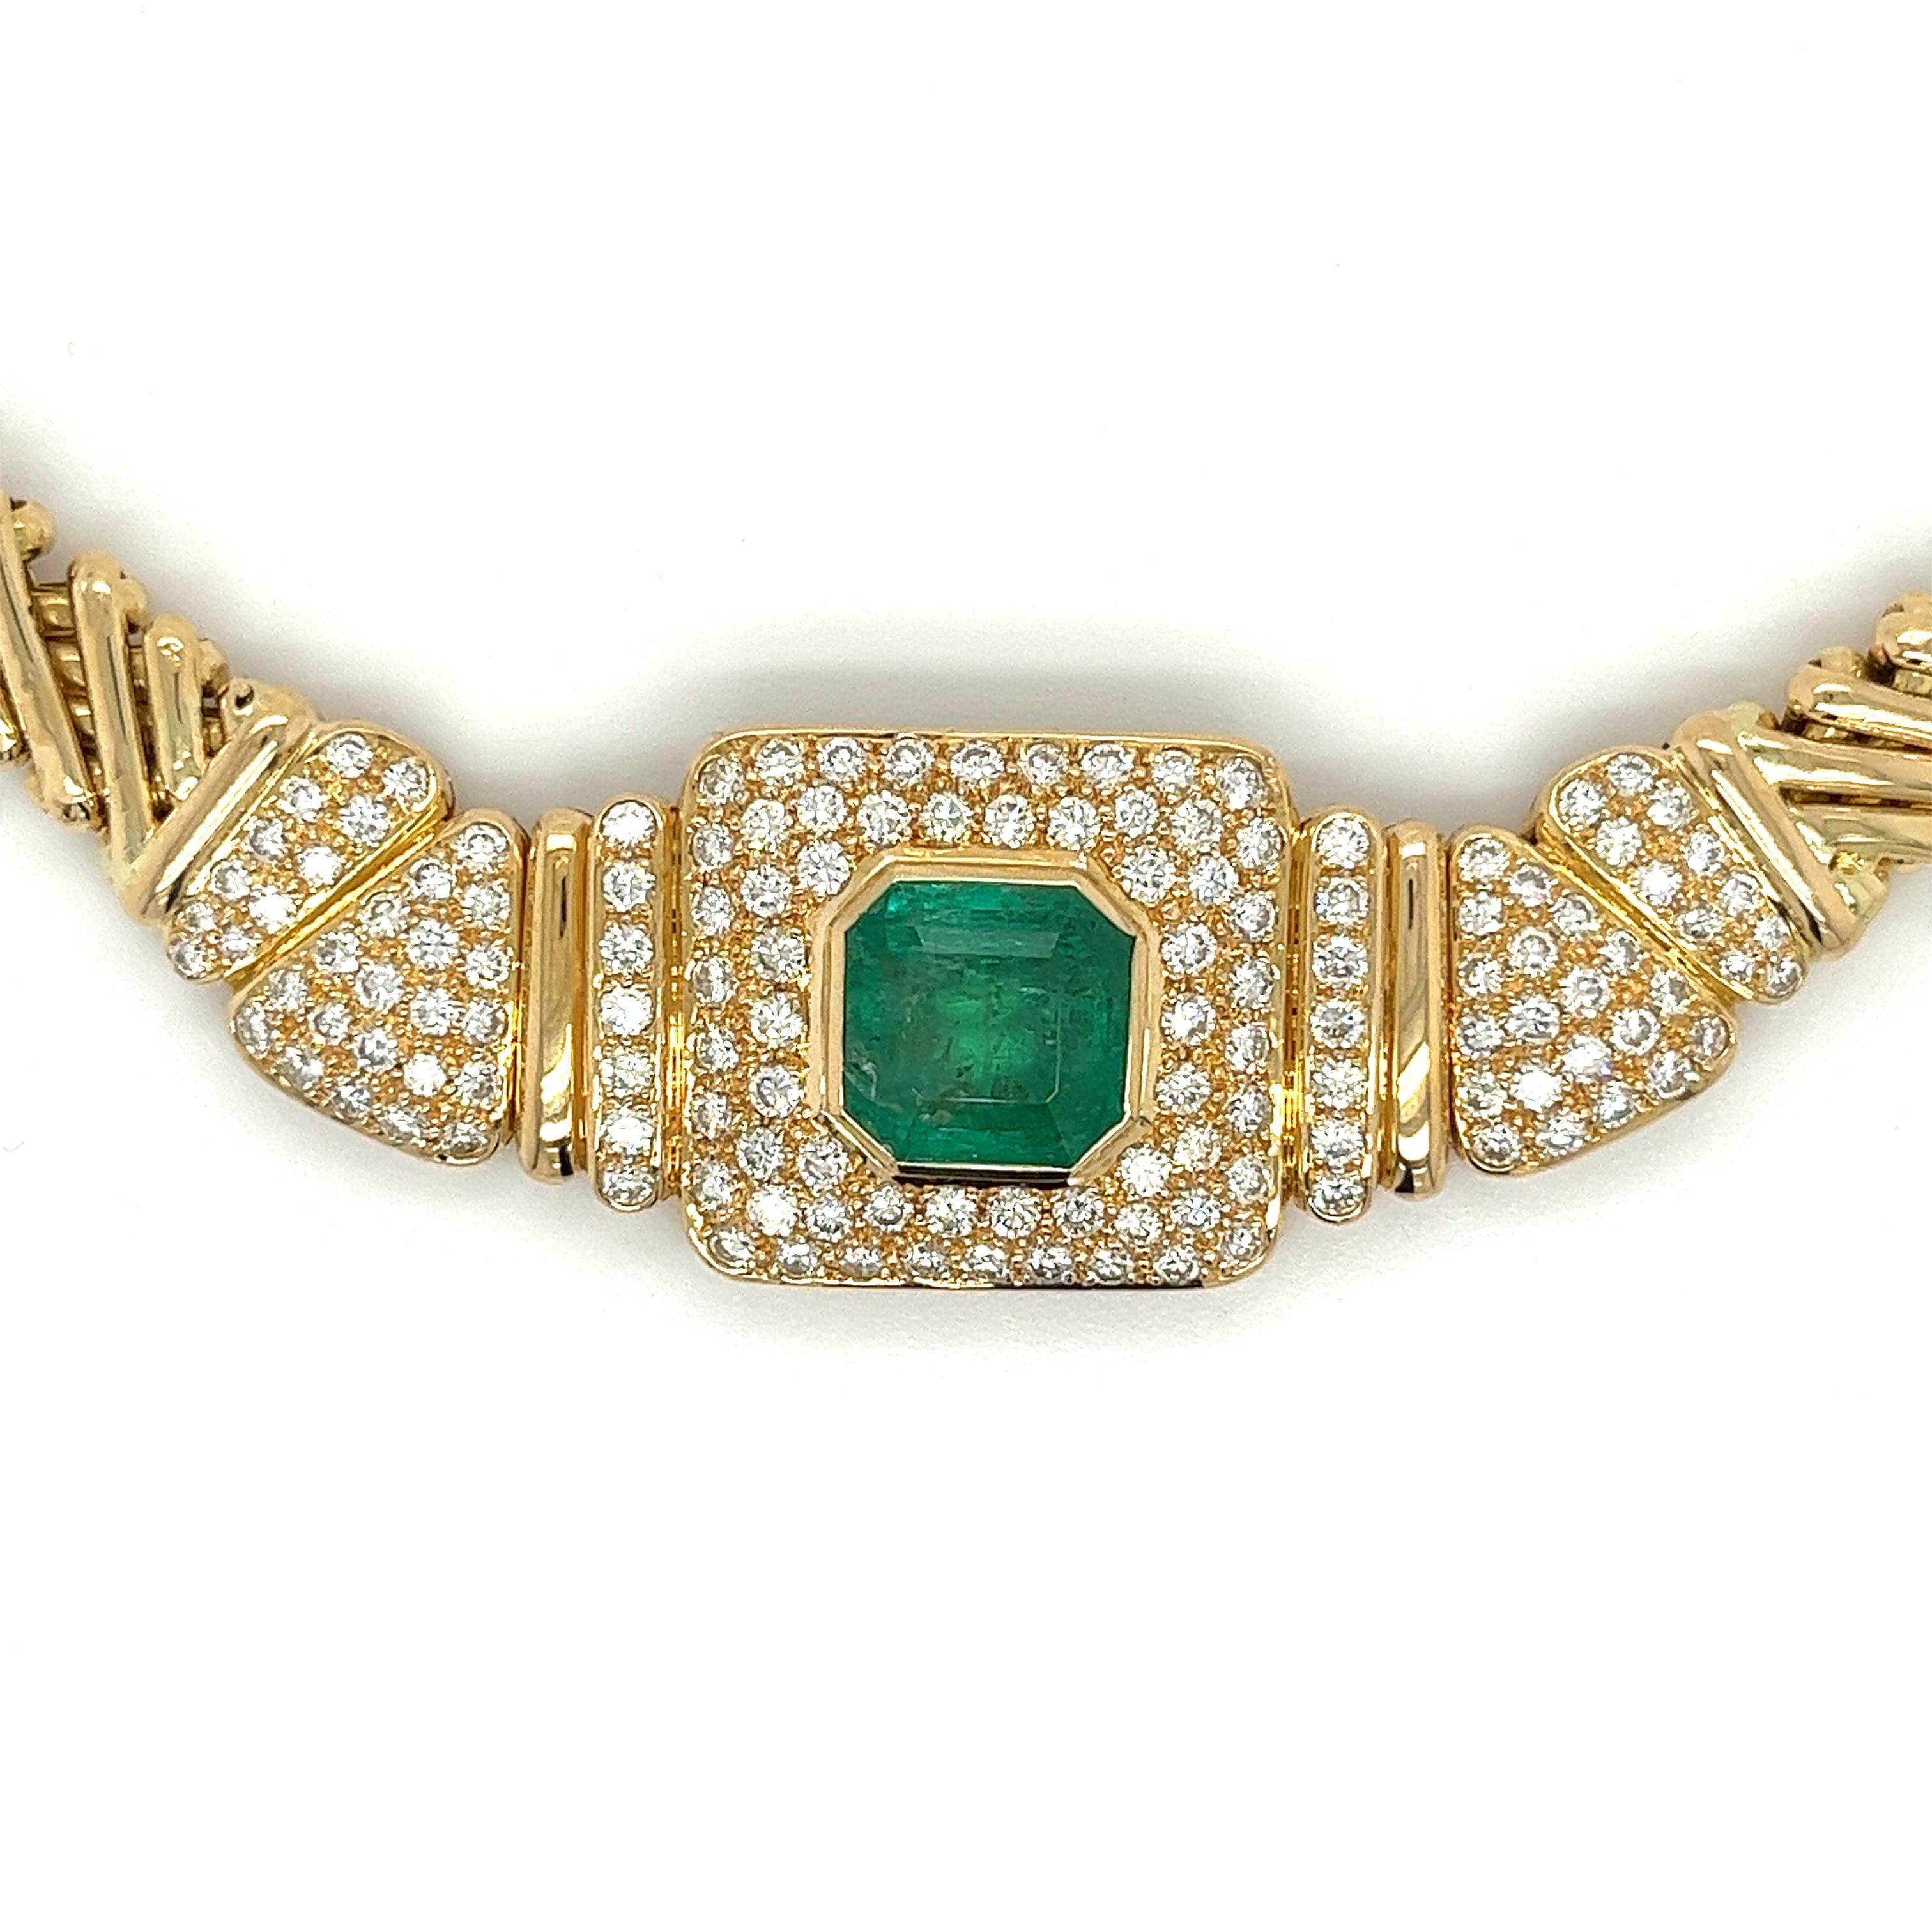 Emerald Cut 6 Carat Natural Colombian Emerald and Diamond Choker Necklace in 18k Yellow Gold For Sale